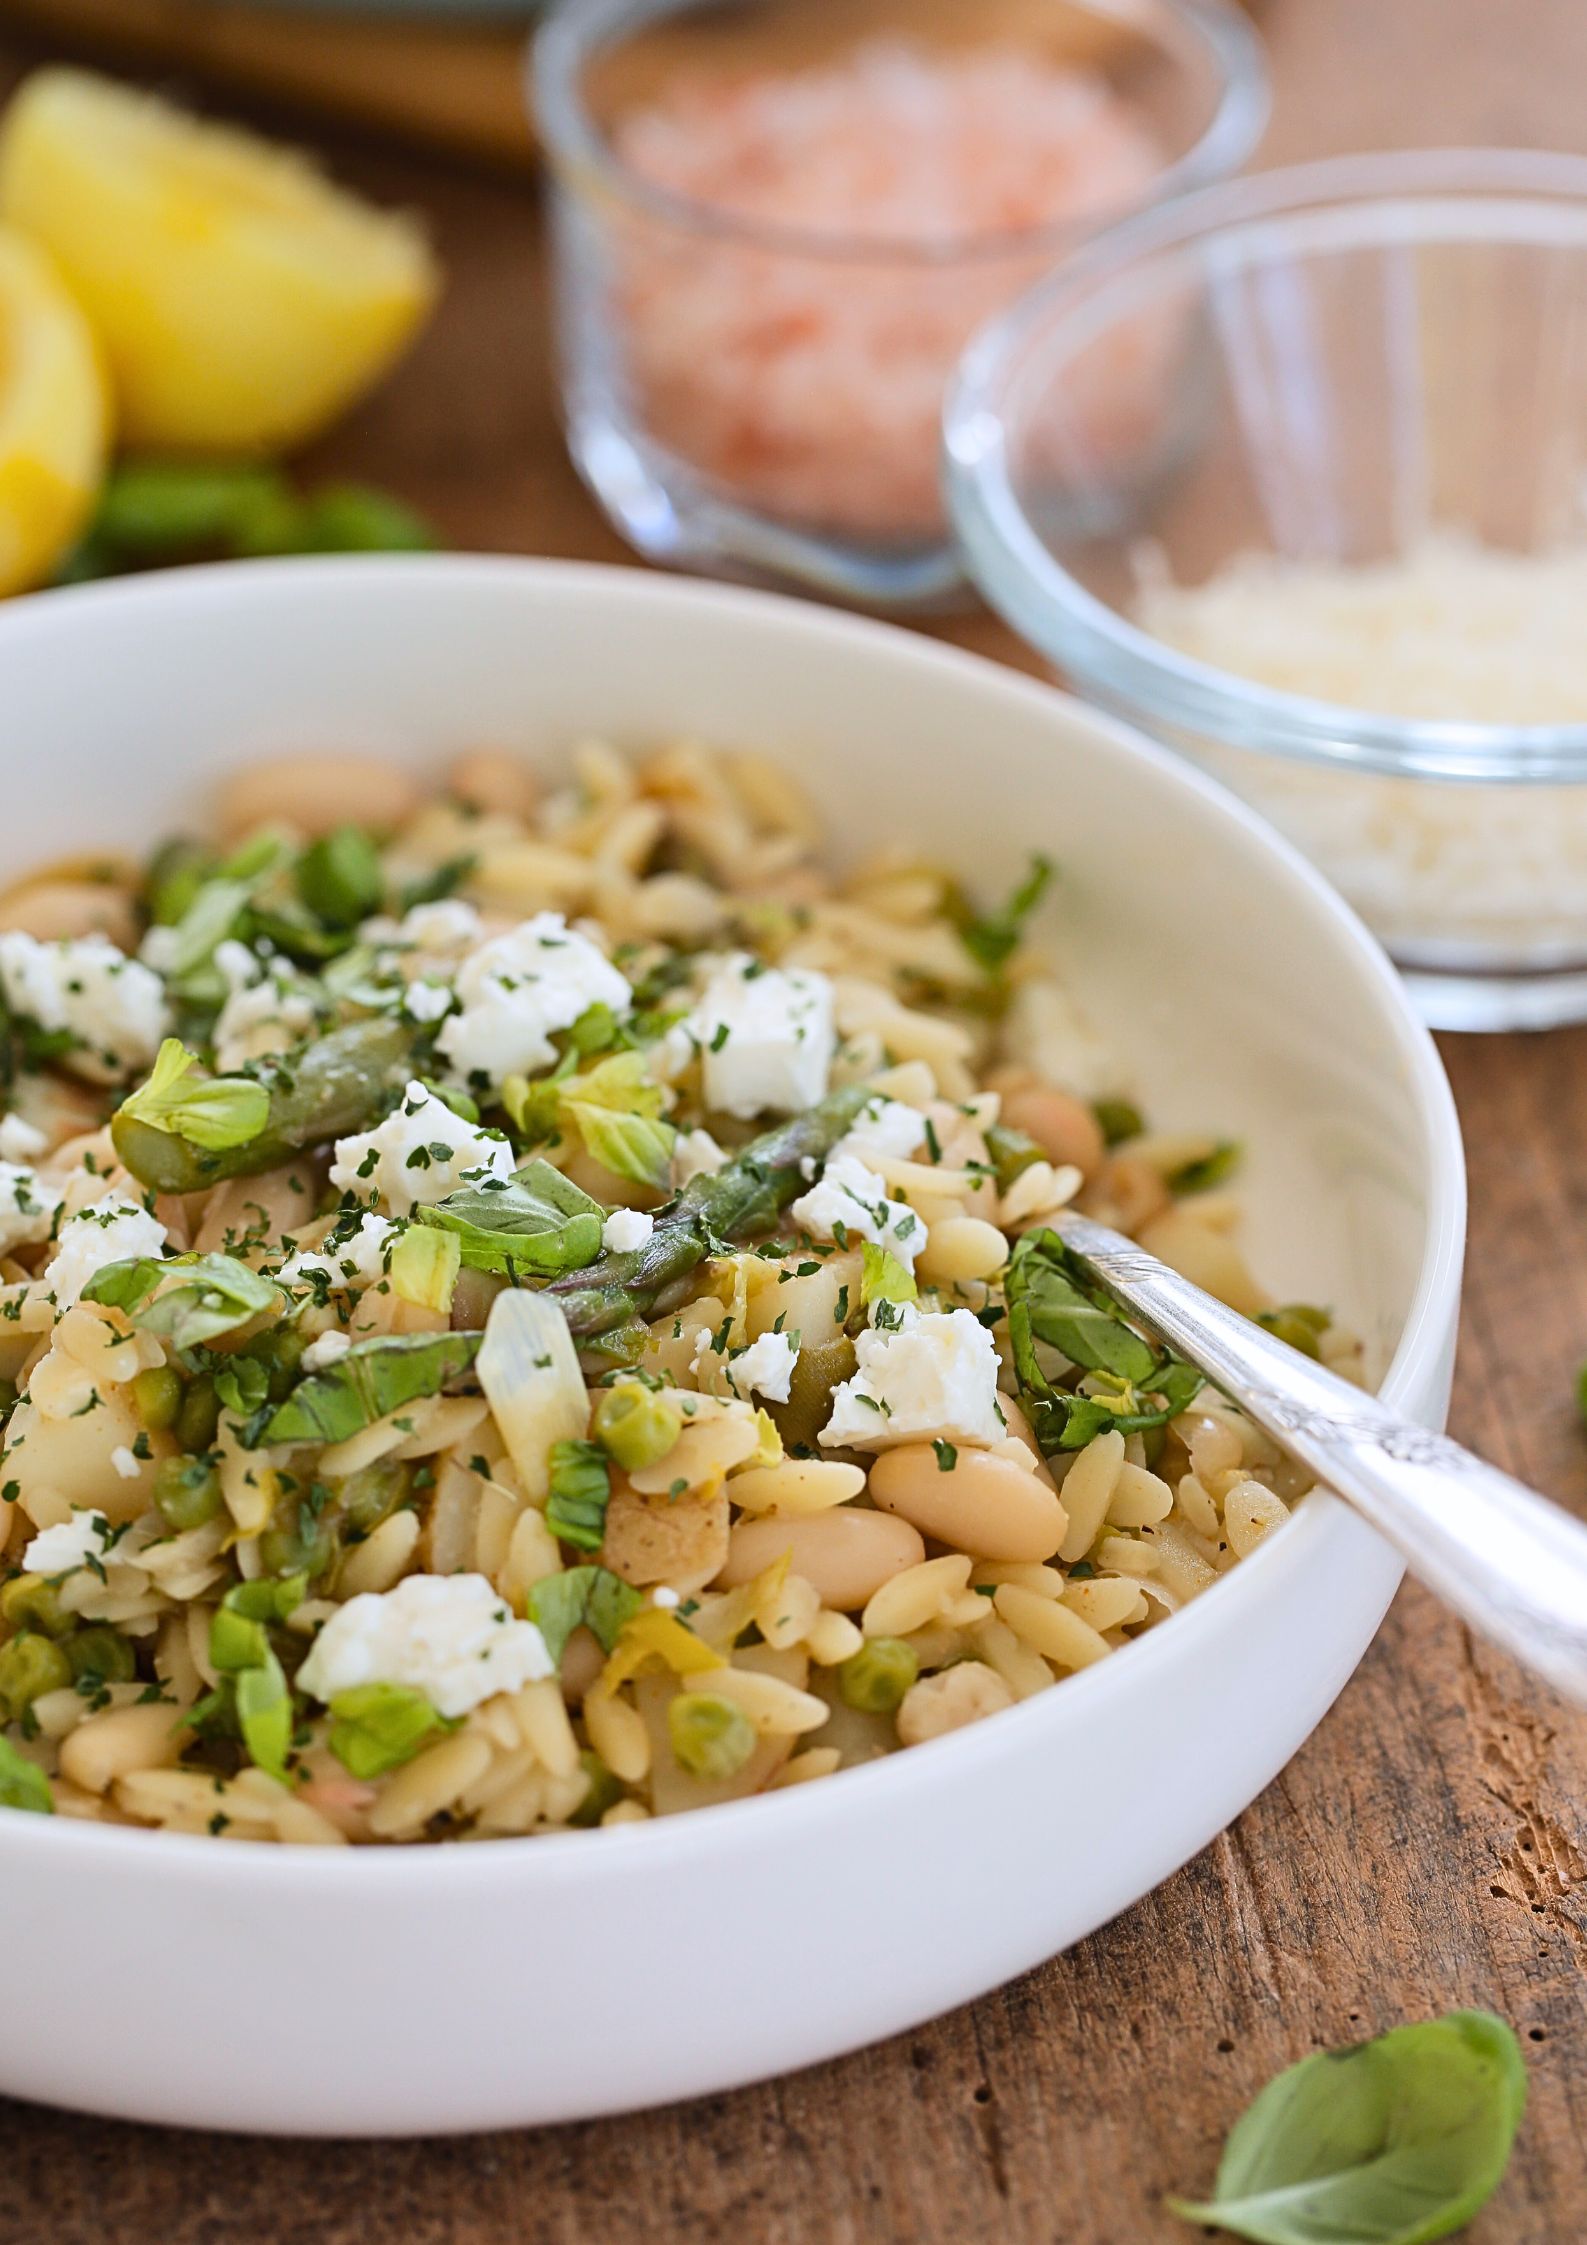 Spring Veggies Orzo Pasta - a lovely light, but jam packed with vegan protein concoction with asparagus, peas, spring onions and fresh basil. Lightened up with zingy lemon. An easy meal whether cooking for one or a houseful! #pastafoodrecipes #pastarecipe #veganrecipe #vegandinner #orzo